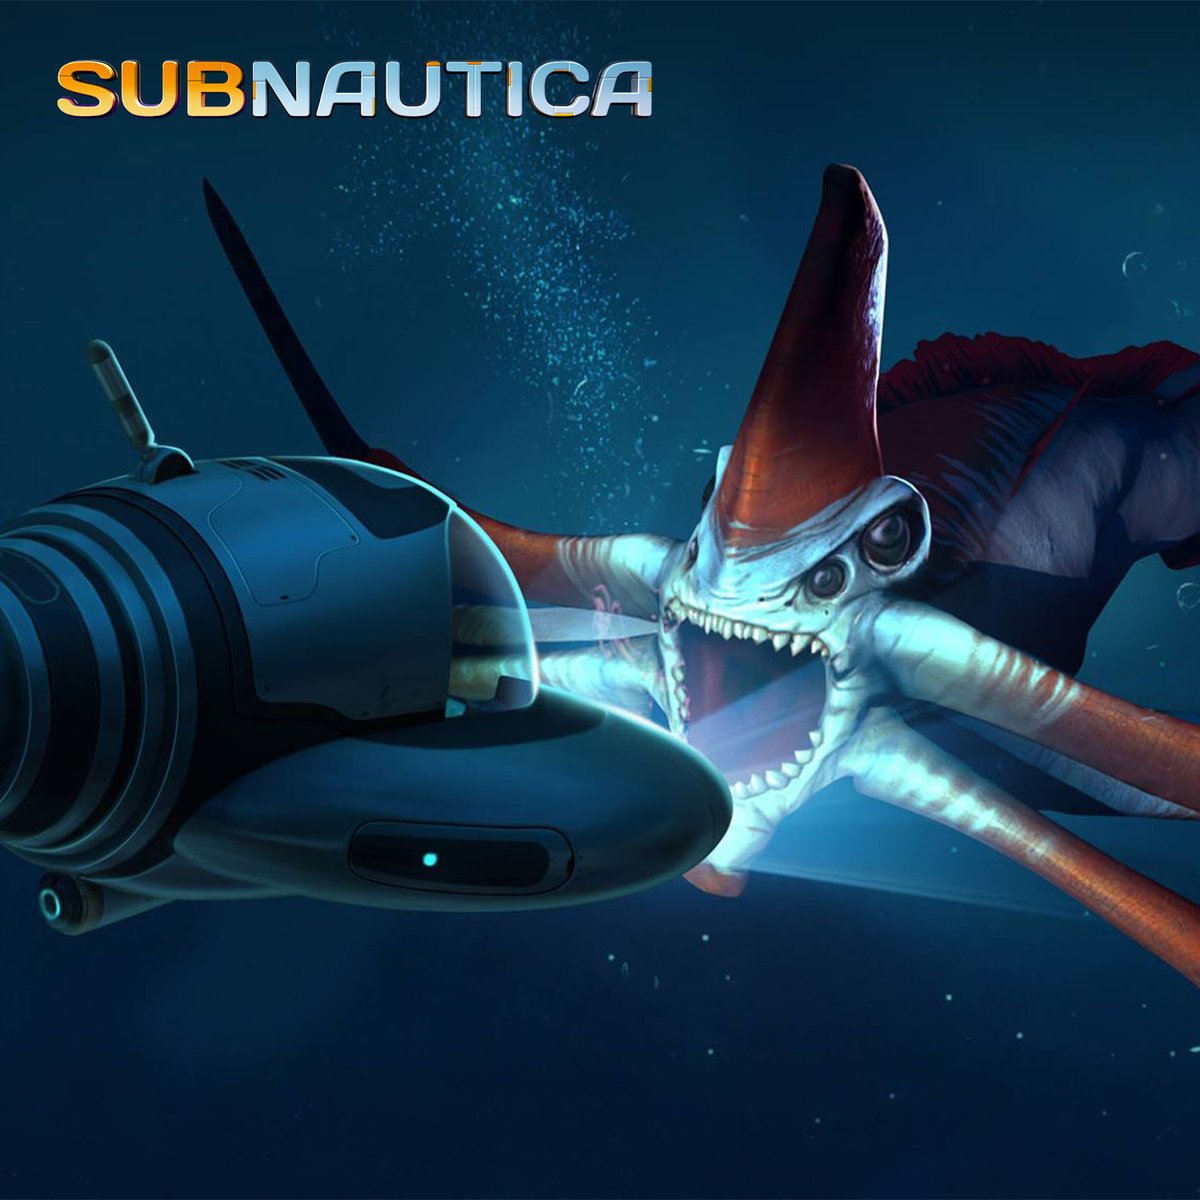 ❕SURPRISE! 🐠Join us at 4pm BST today as we explore the depths of Planet 4546B in our #Subnautica surprise #stream. 📺Tune in over at #YouTube - loom.ly/V9umt1s